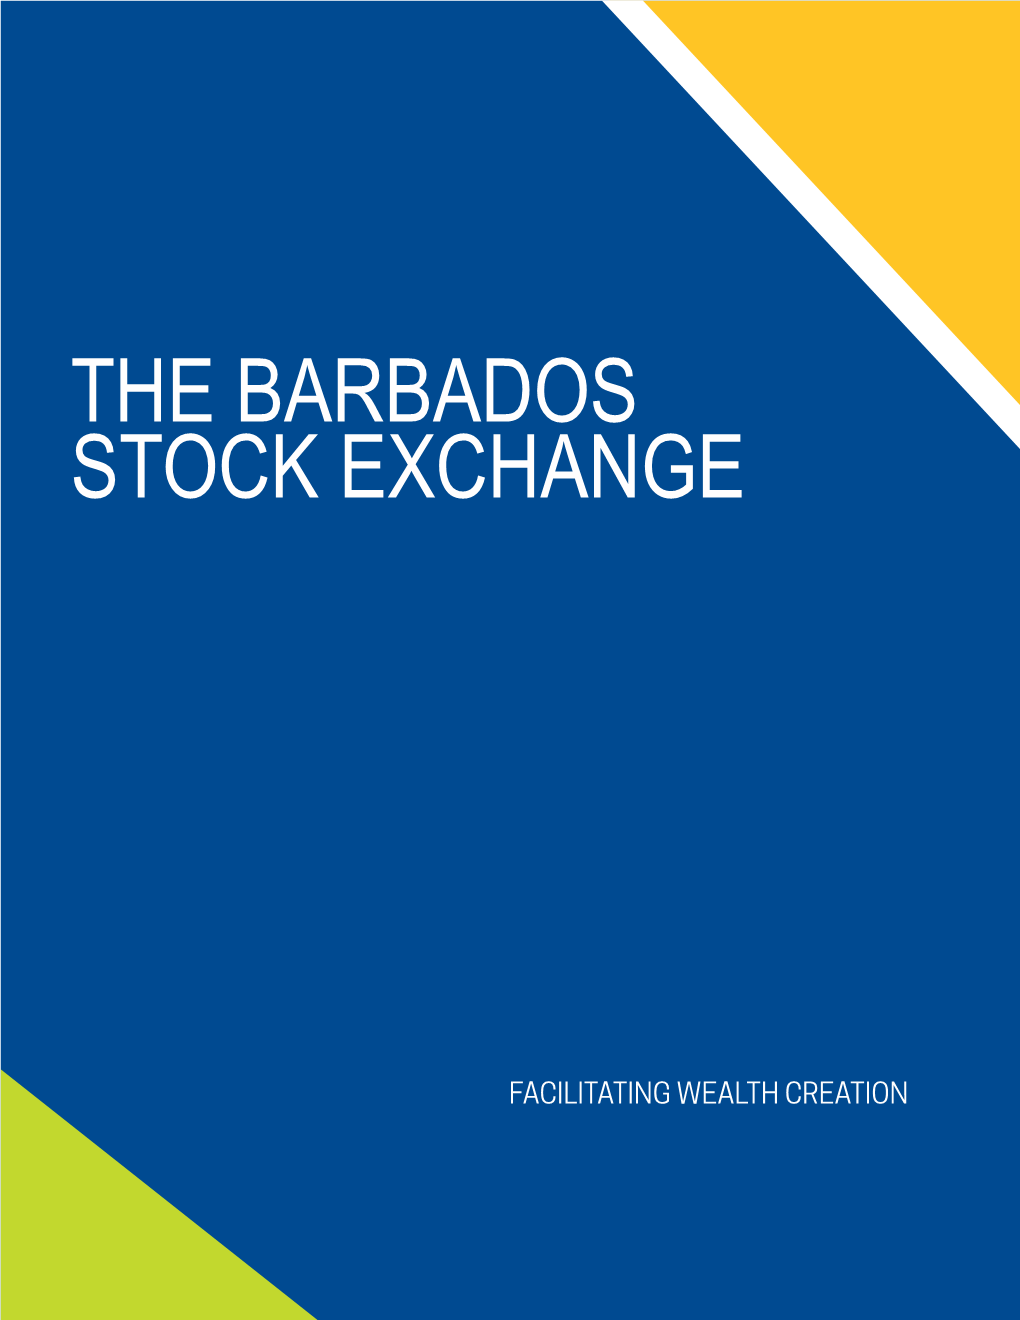 The Barbados Stock Exchange